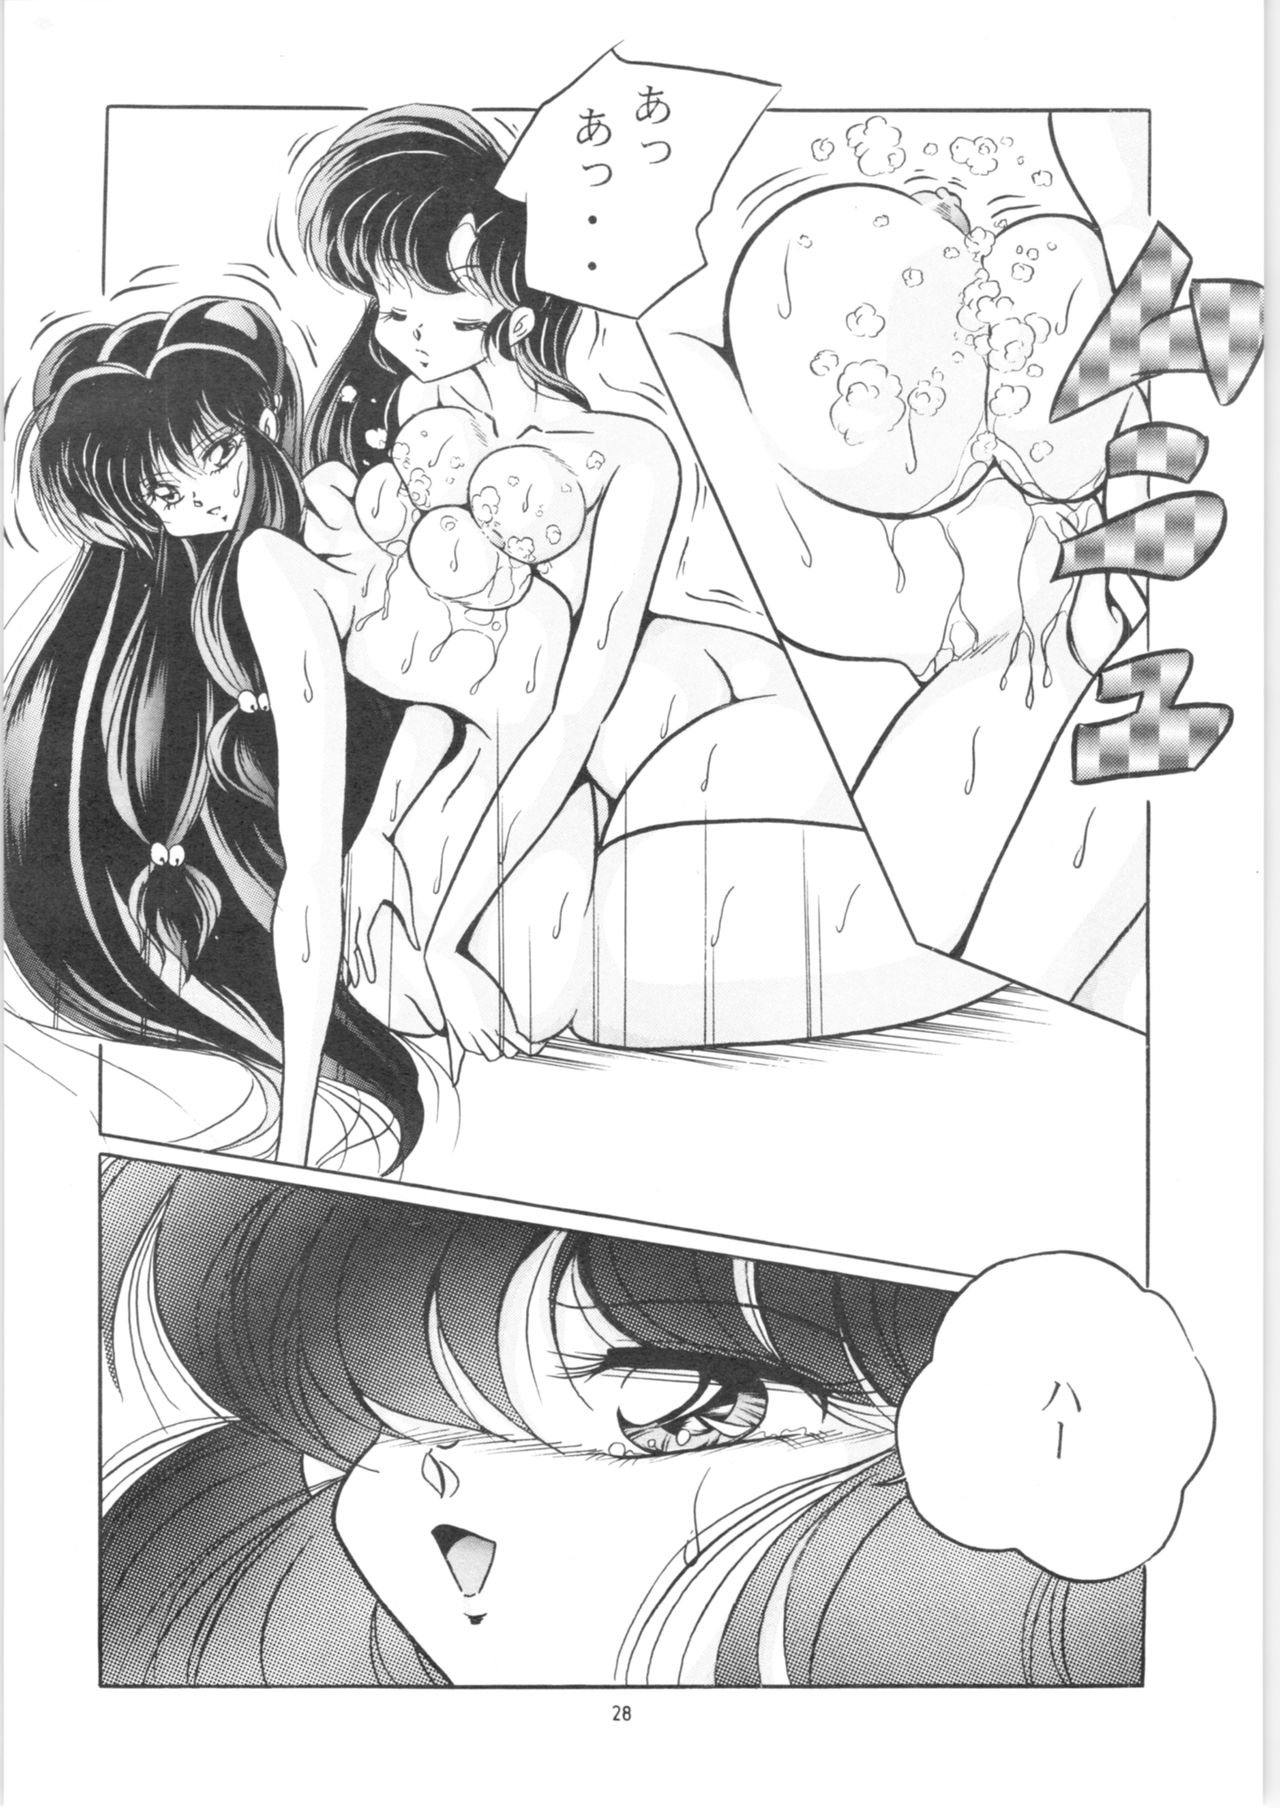 [C-COMPANY] C-COMPANY SPECIAL STAGE 14 (Ranma 1/2) page 29 full